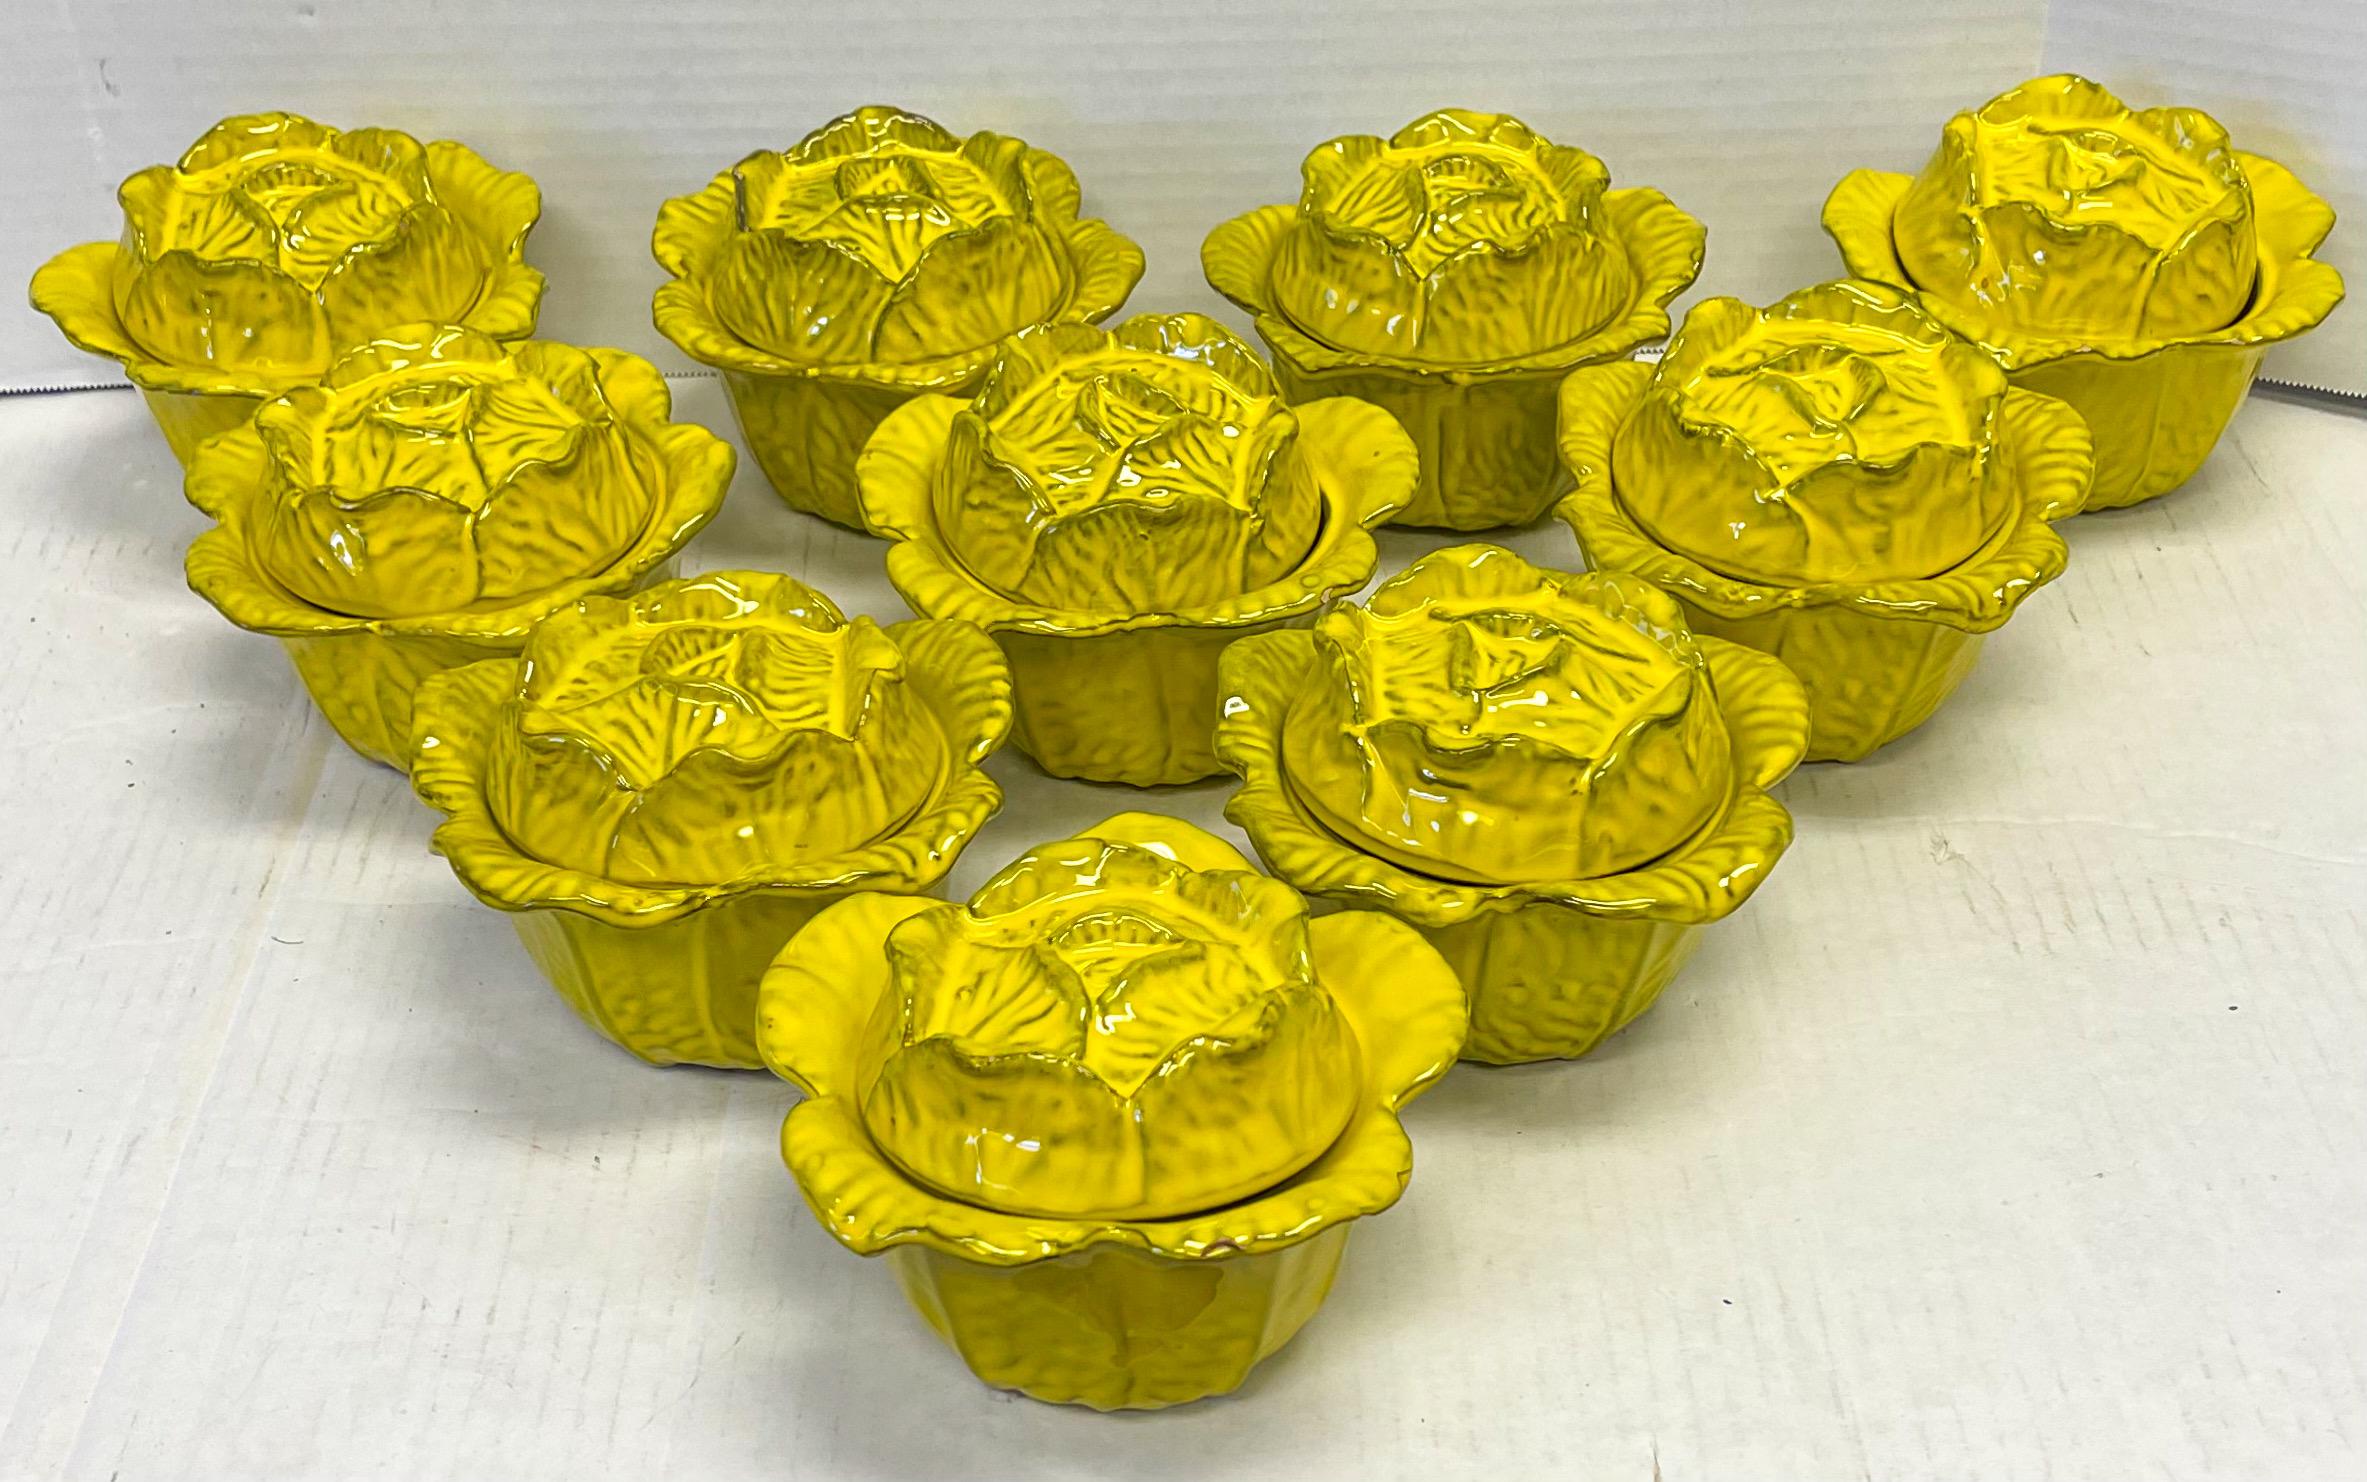 Perfect for a festive holiday table! This is a set of ten signed yellow majolica glazed terracotta cabbage form serving bowls with lids. They date to the 60s and are in very good condition.